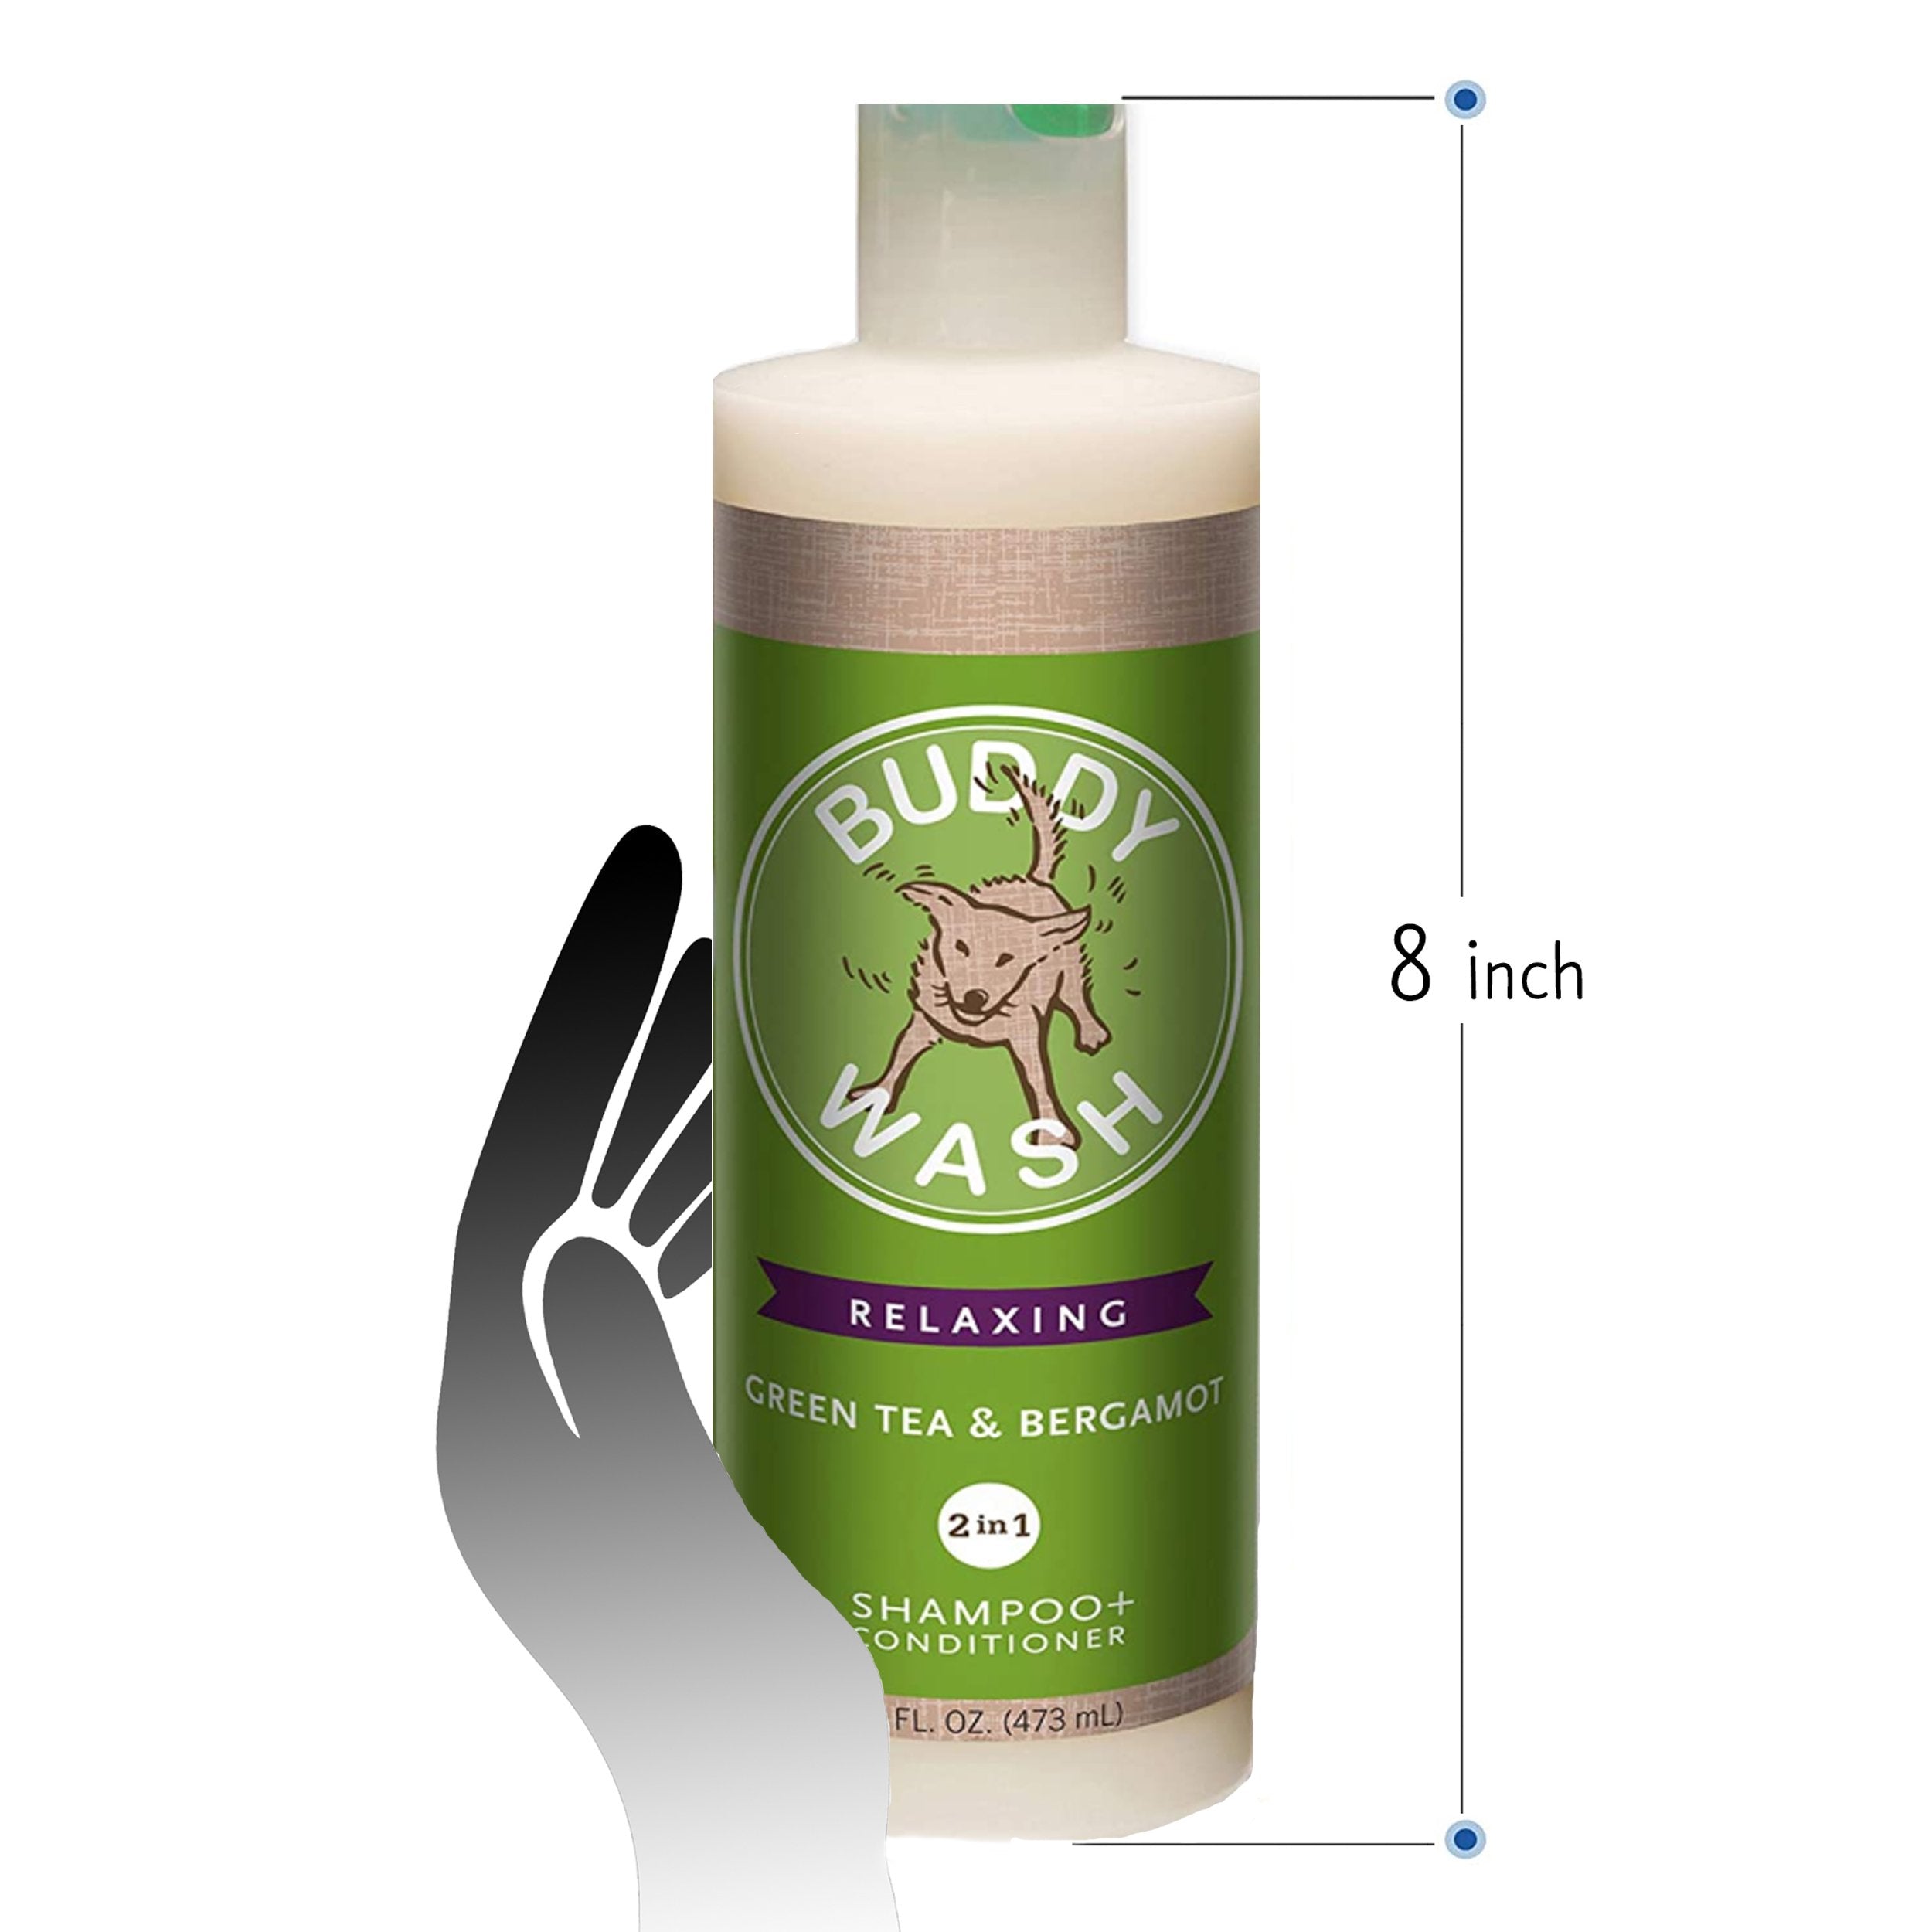 Buddy Wash Relaxing Bergamot 2in1 Shampoo and Conditioner 16 fl oz for dogs Fresh and Clean Coat Softener Size measurements 8 Inch Bottle 